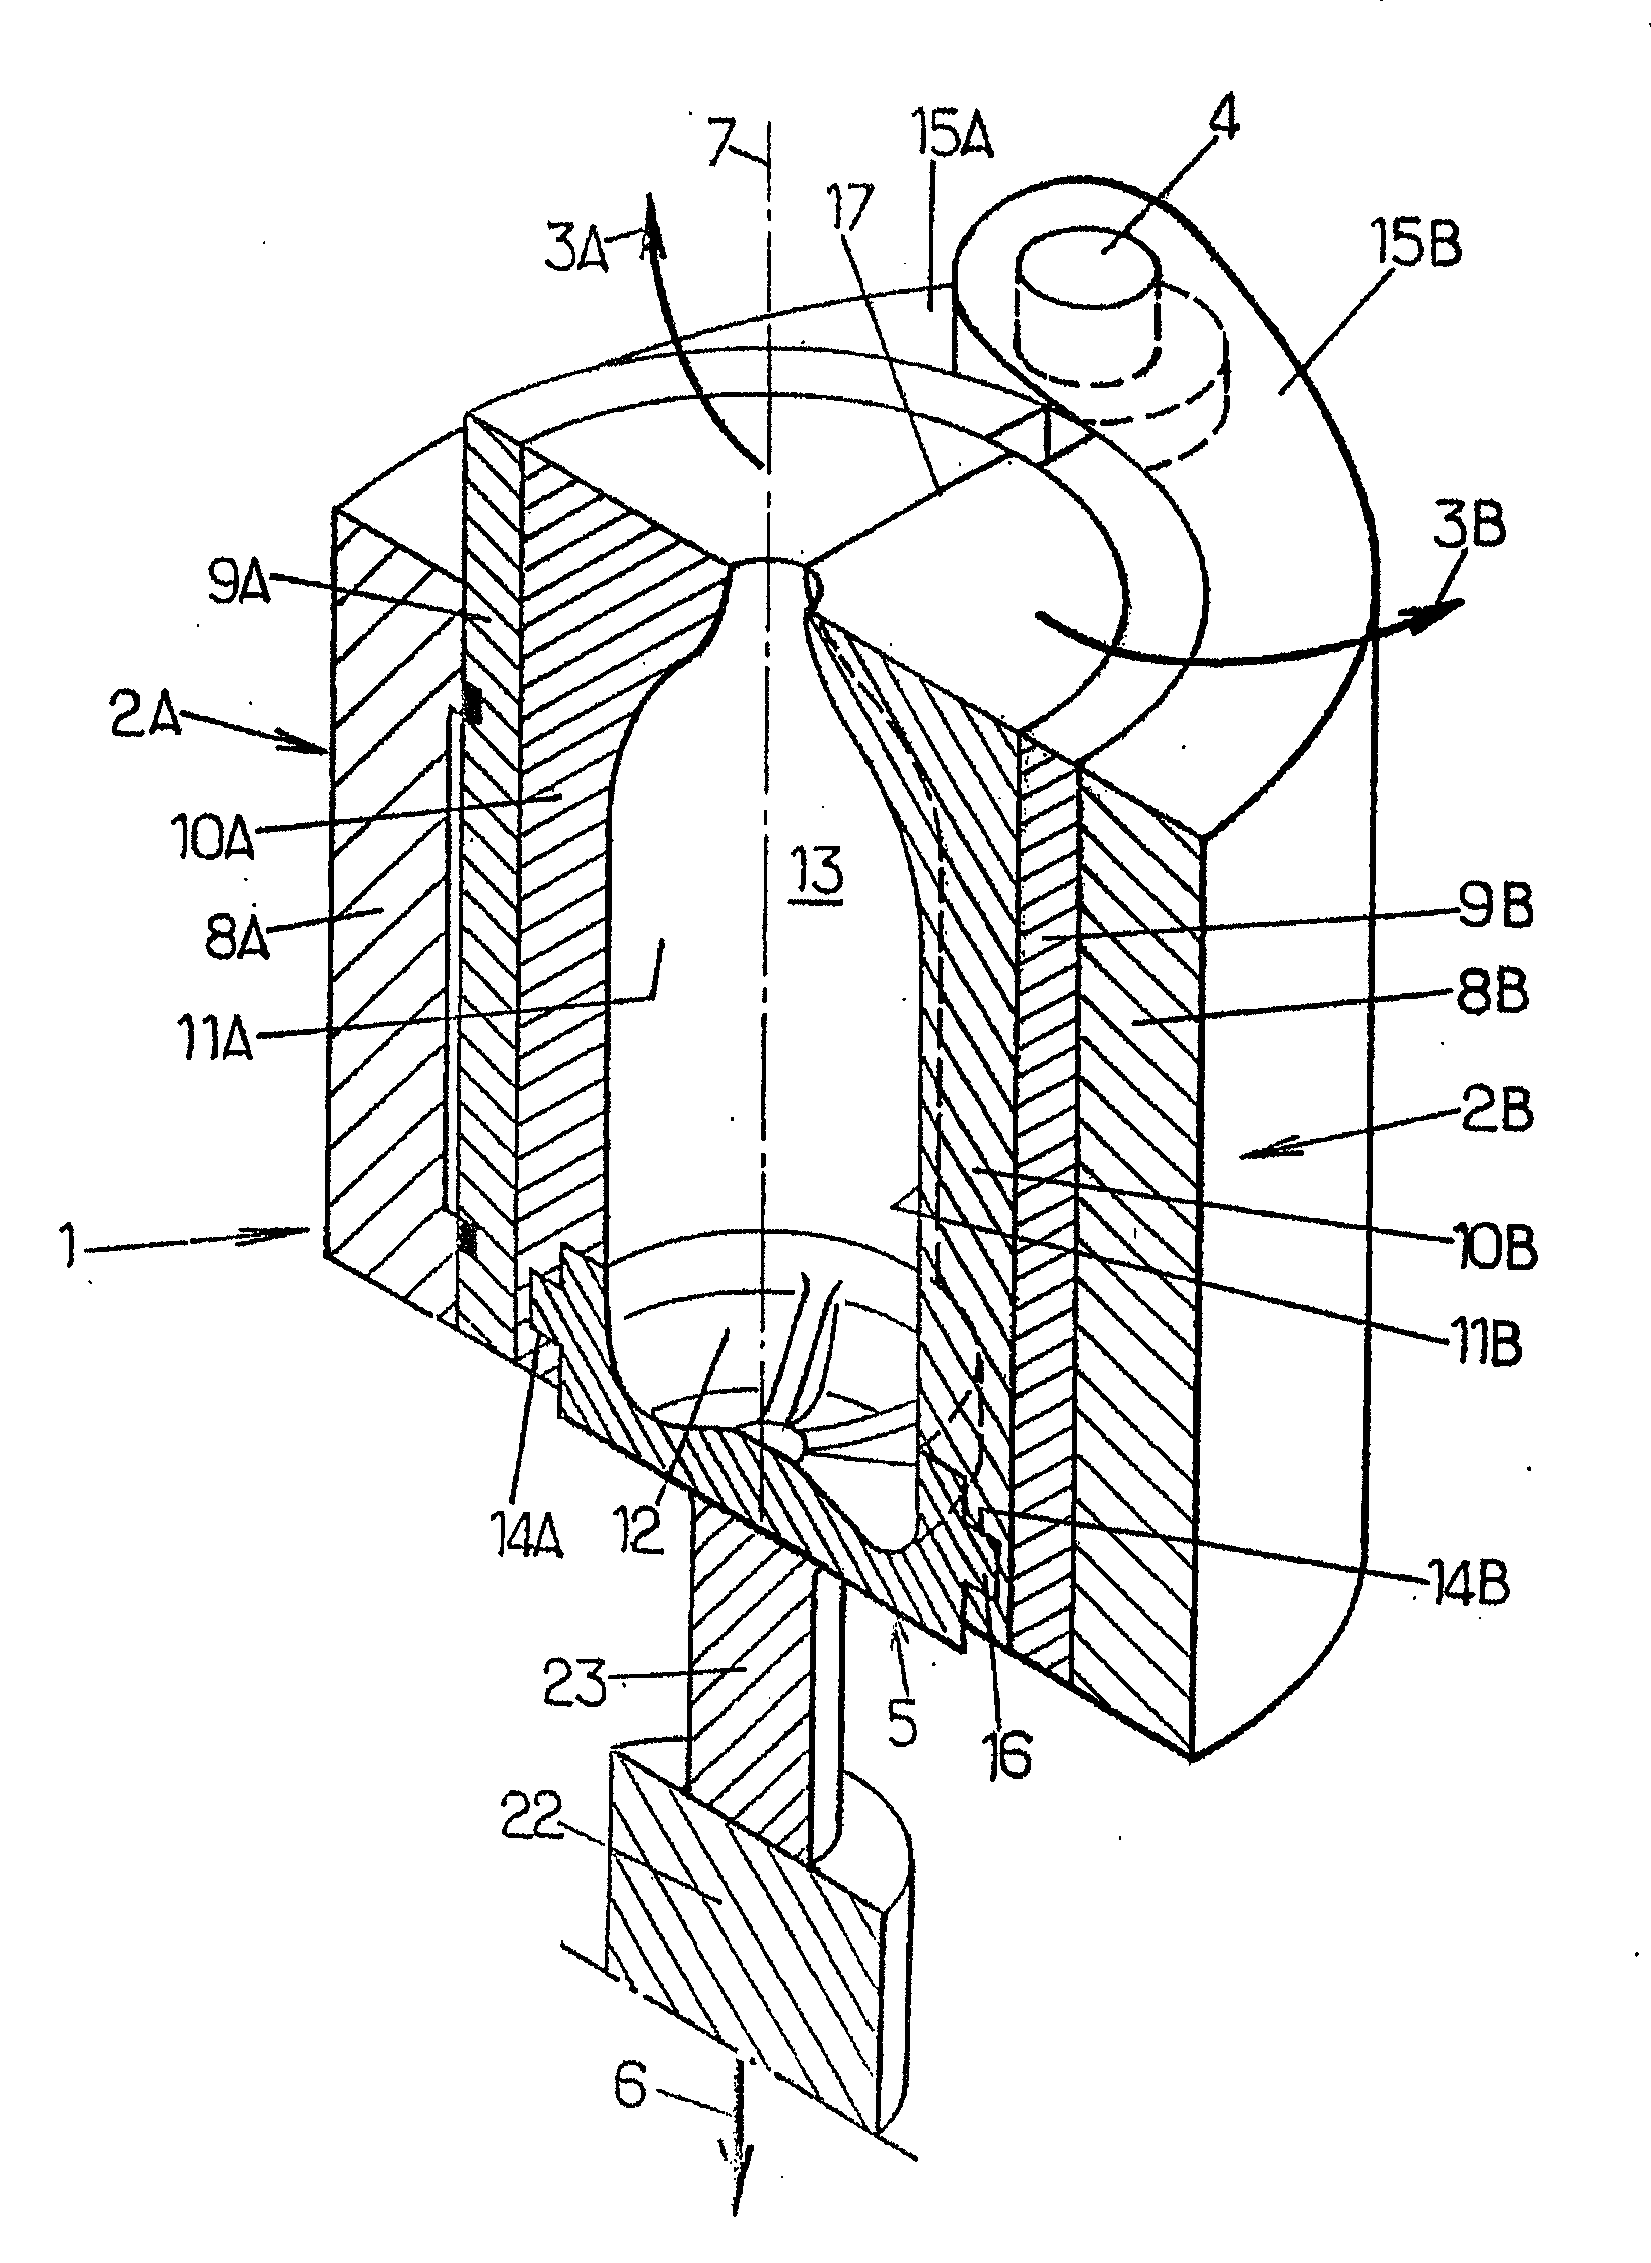 Molding Device with Hight-Adjustable Base for Molding Thermoplastic Containers of Various Heights